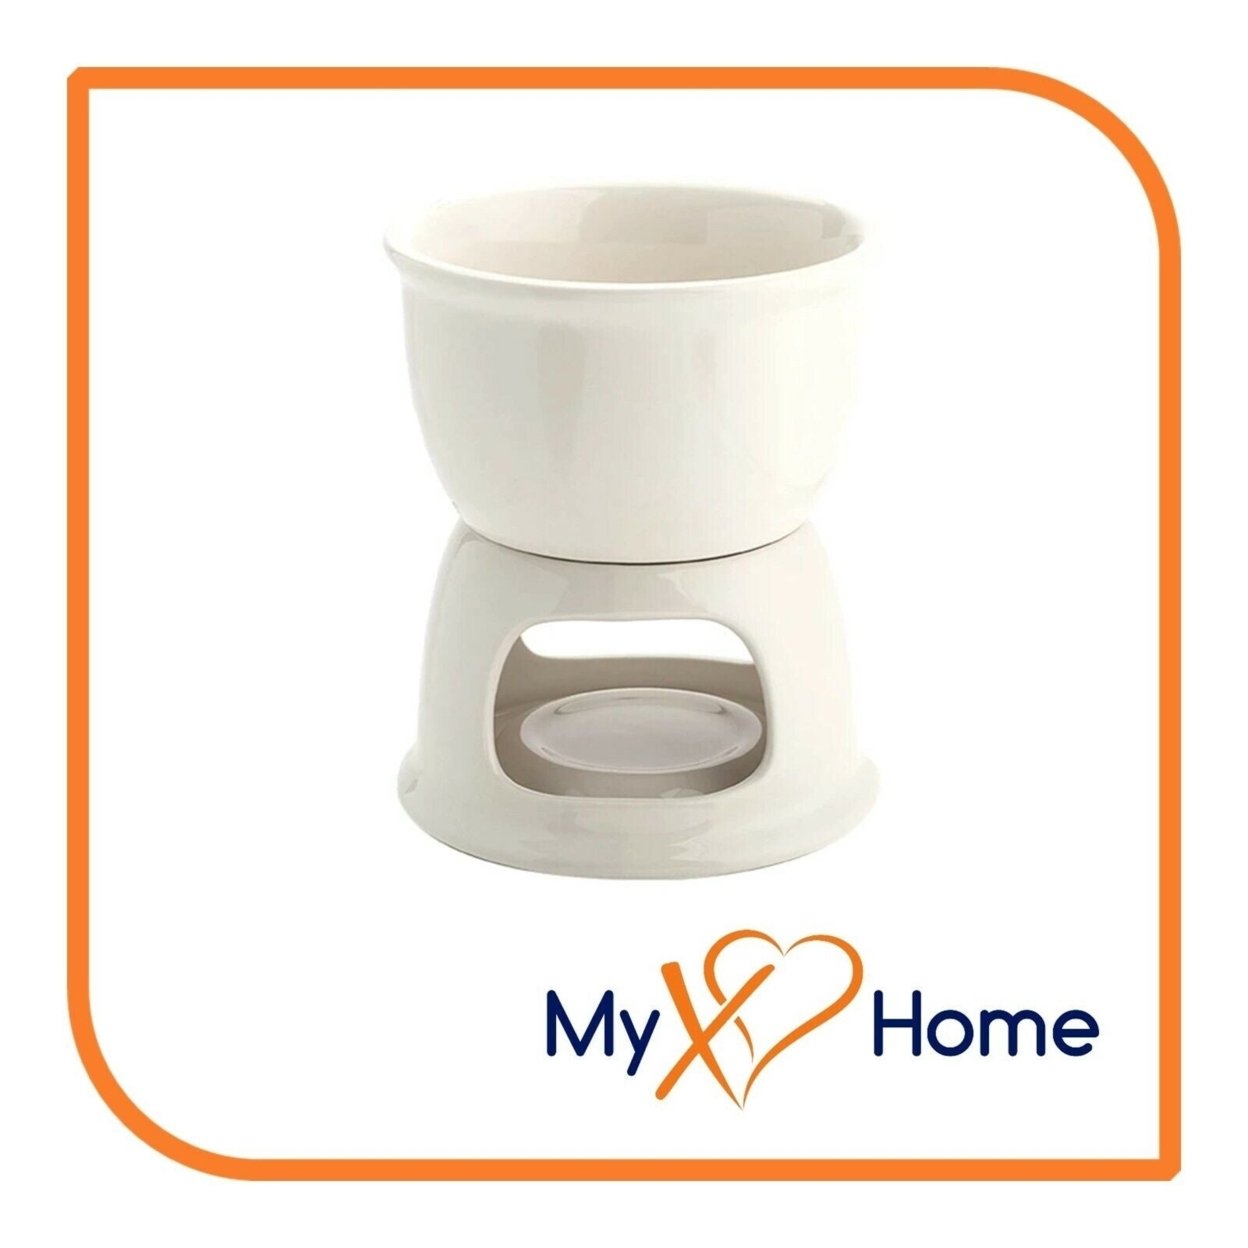 MyXOHome Ceramic Chocolate Fondue Pot / Cheese melting Pot Color: White by MyXOHome